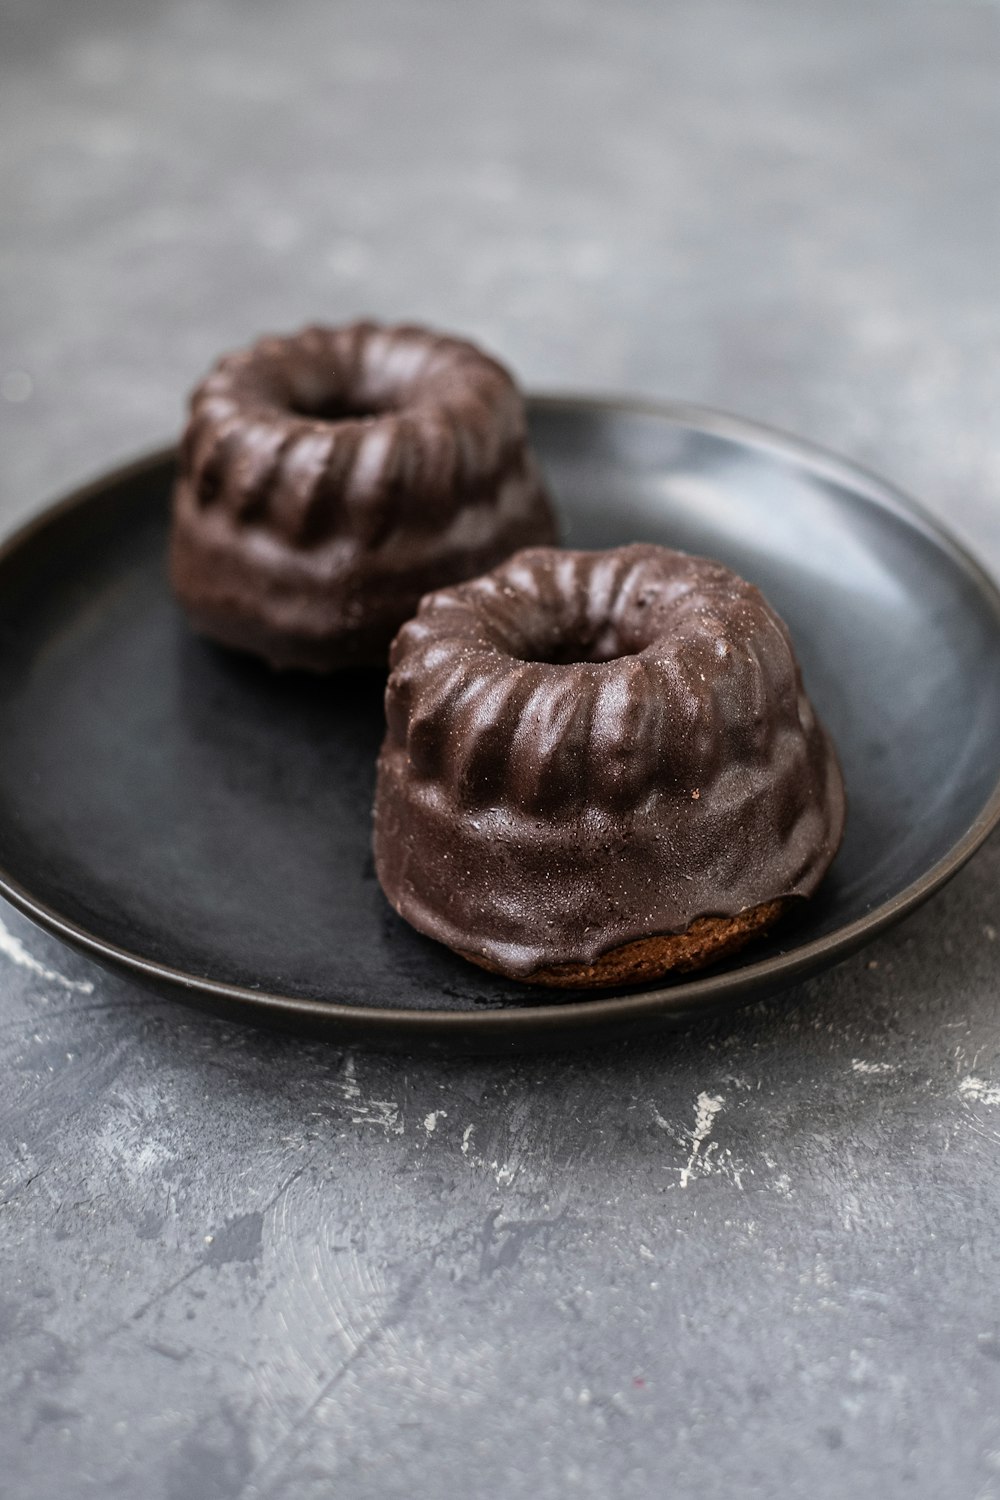 two chocolate donuts sitting on a black plate